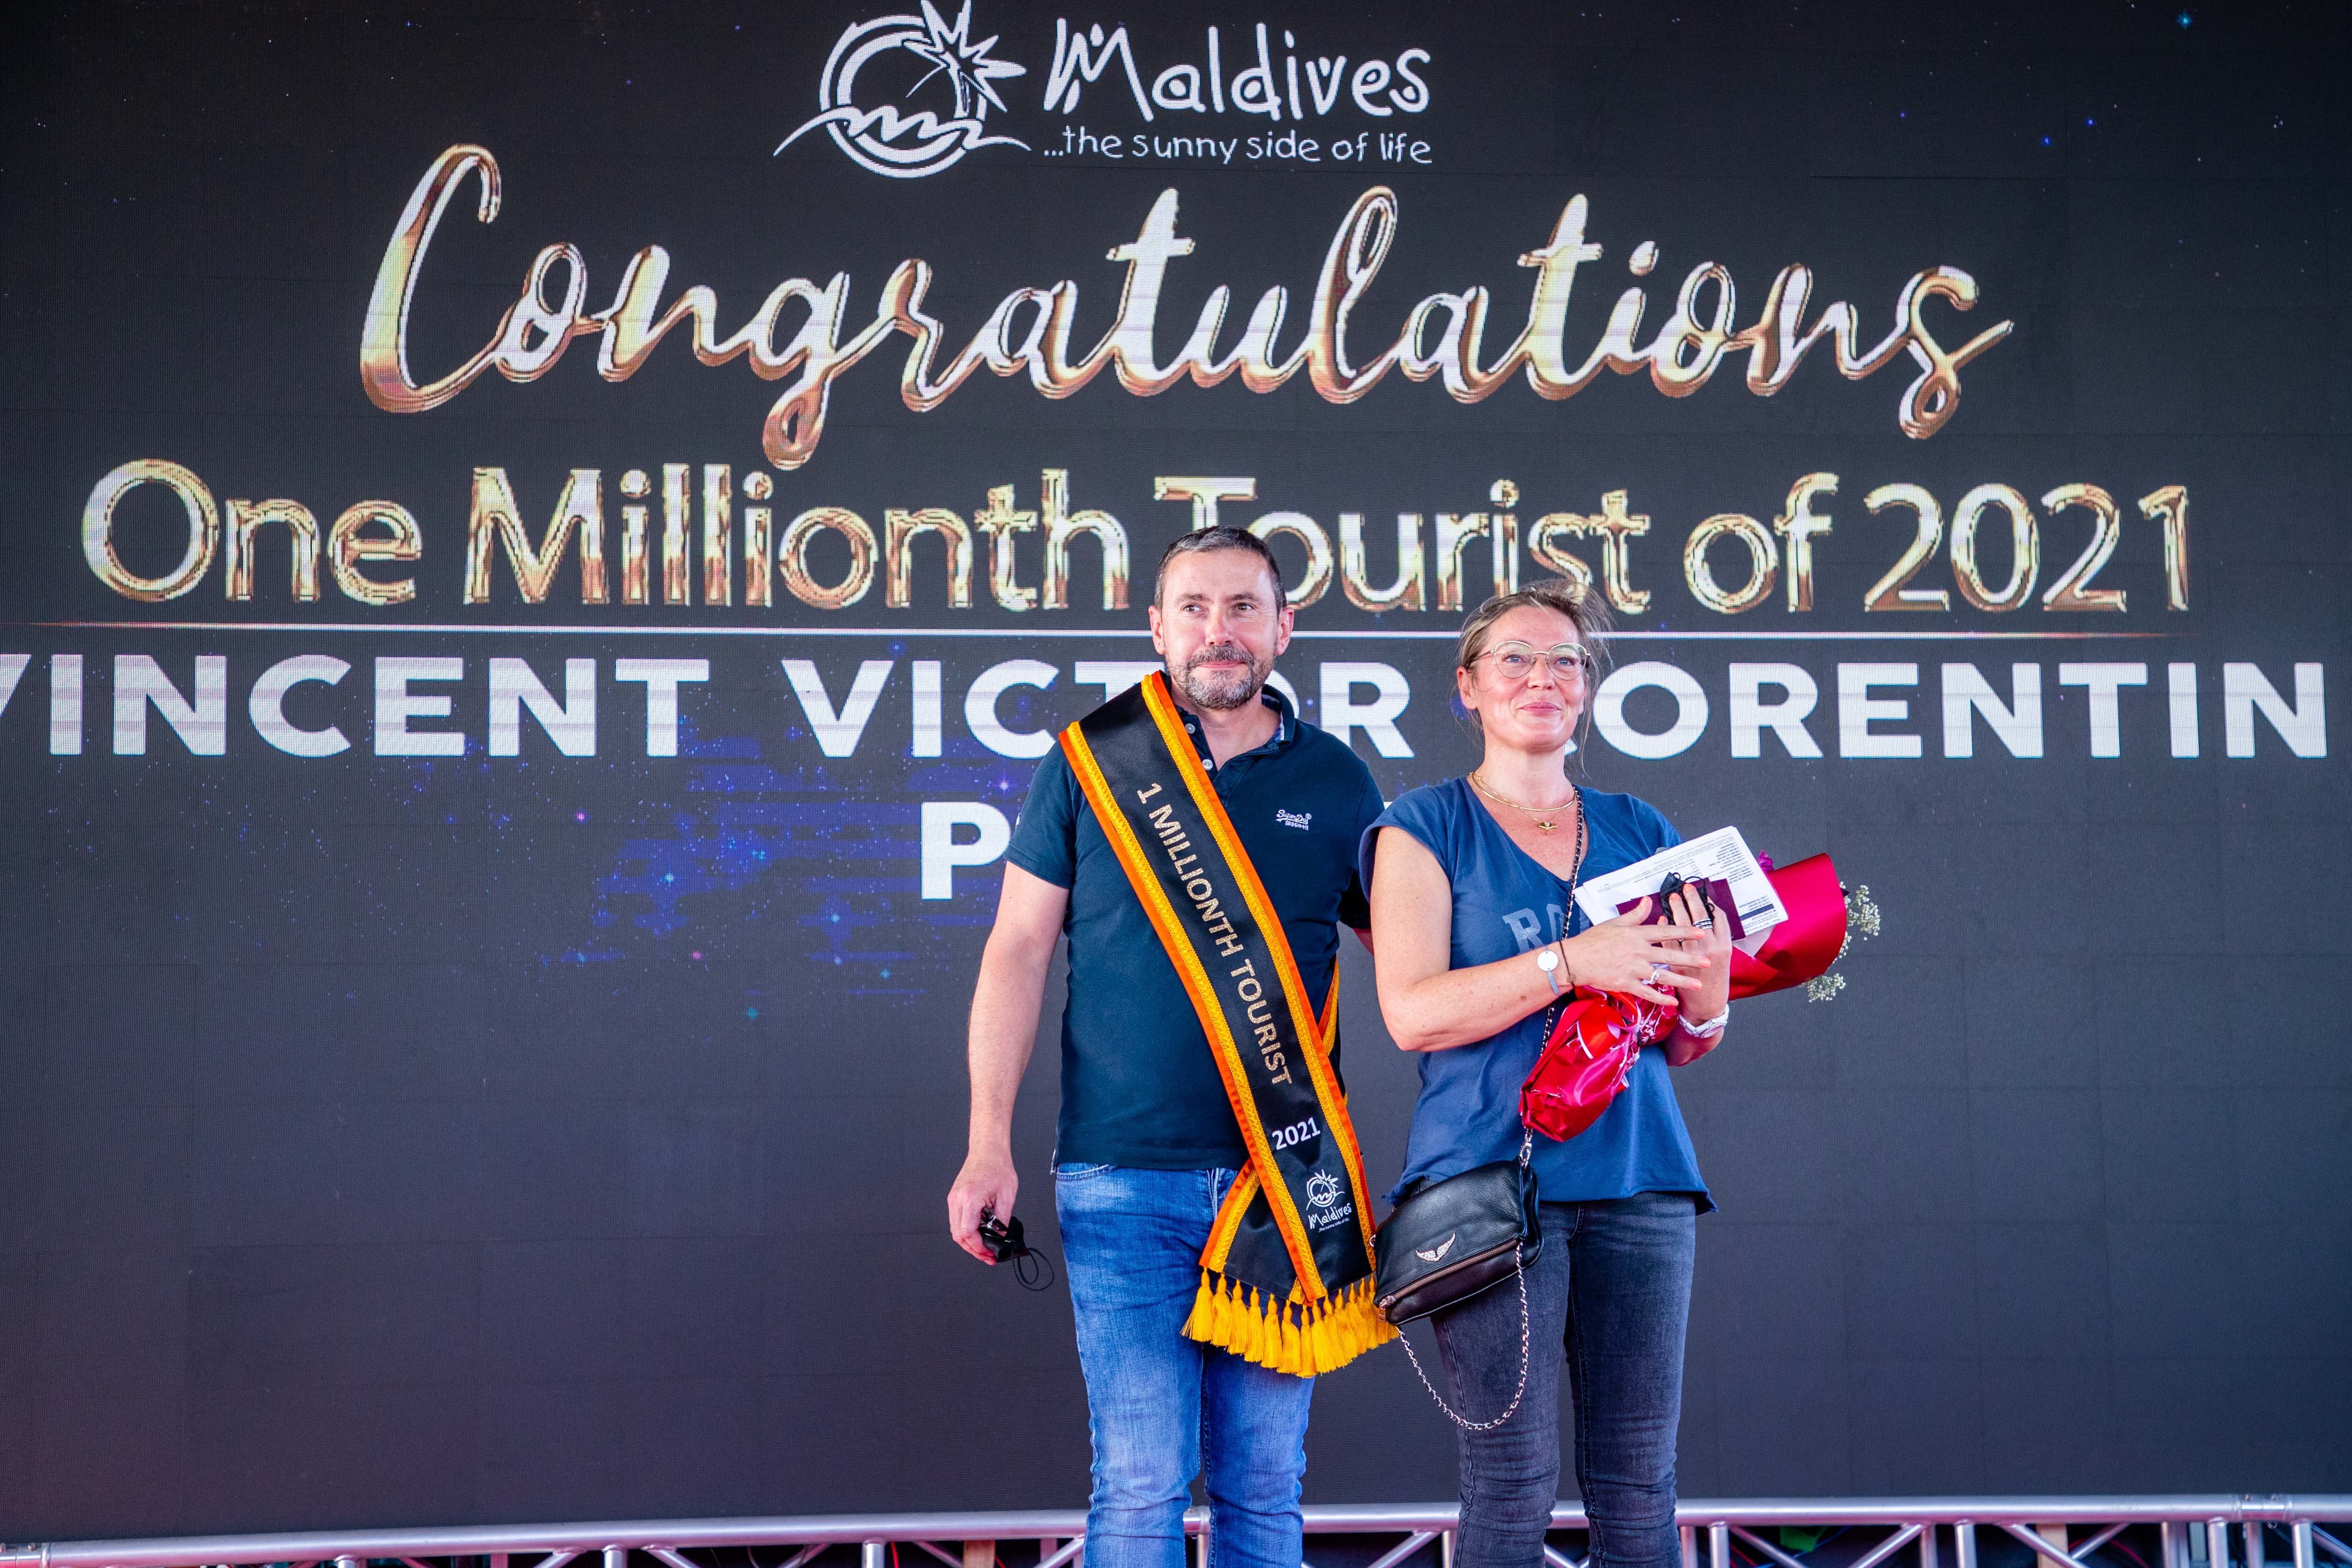 Maldives welcomes the 1 Millionth Tourist 1 1